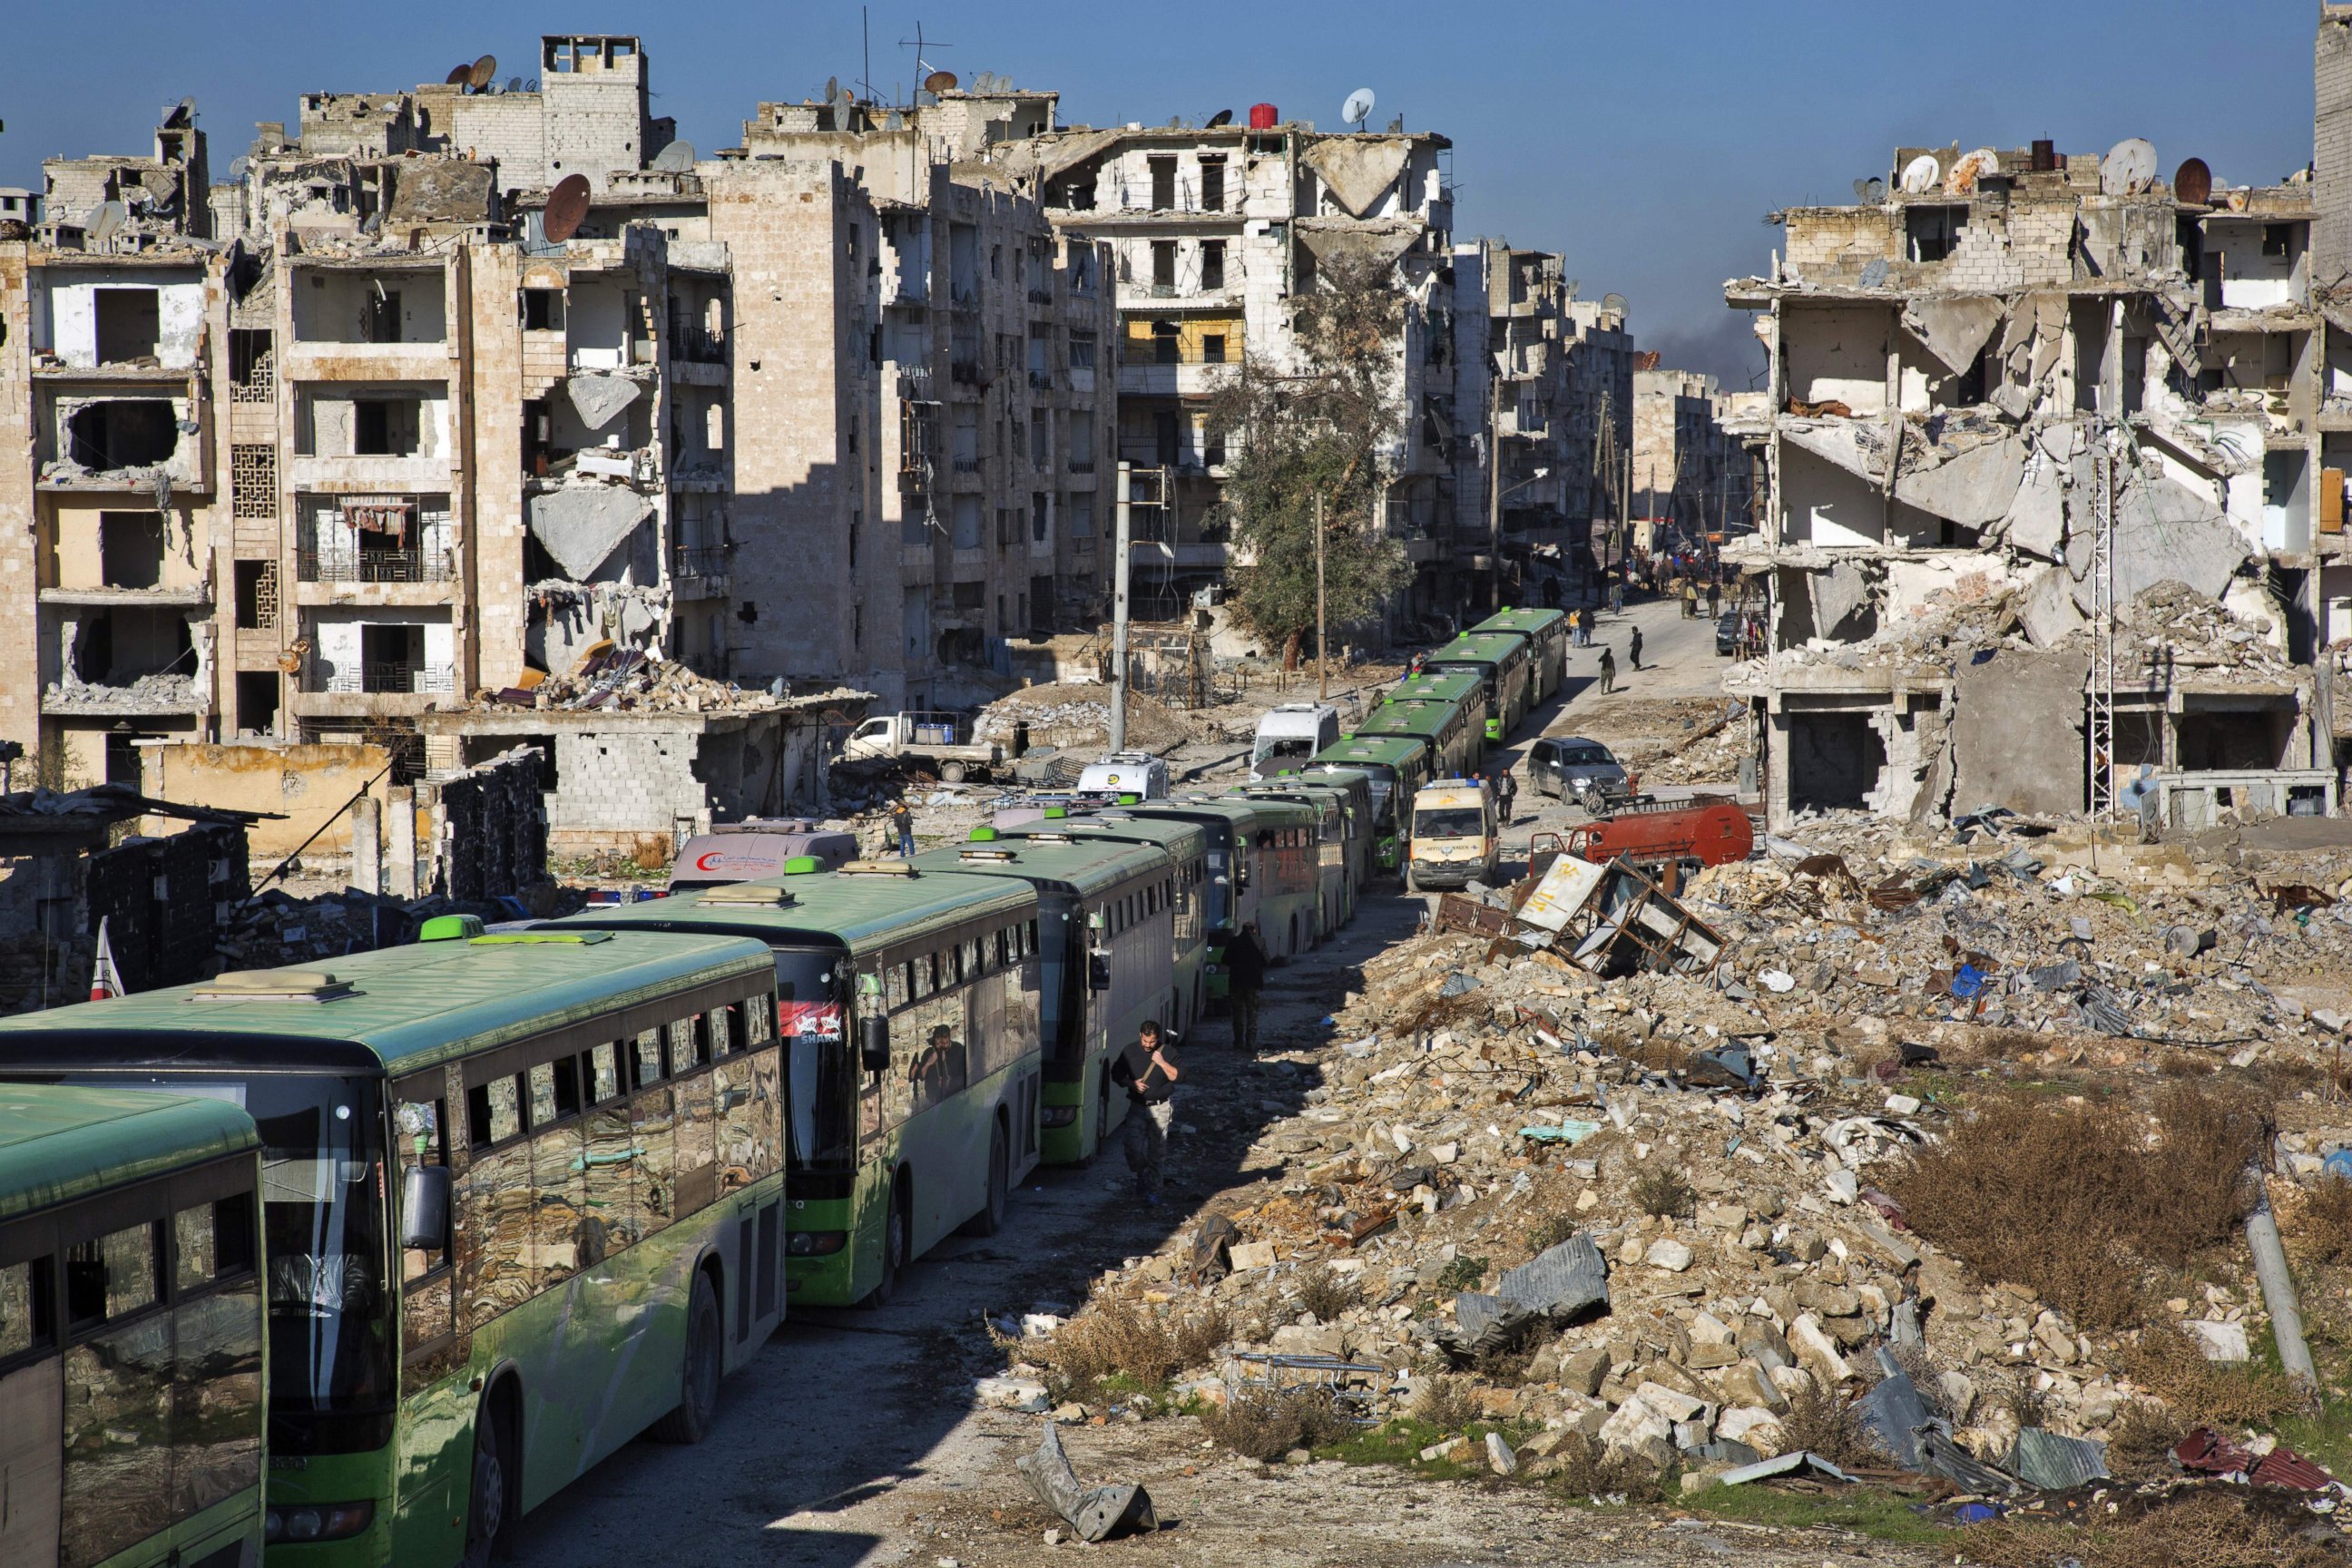 PHOTO: Buses are seen during an evacuation operation of rebel fighters and their families  from rebel-held neighborhoods in Aleppo, Syria, Dec. 15, 2016.